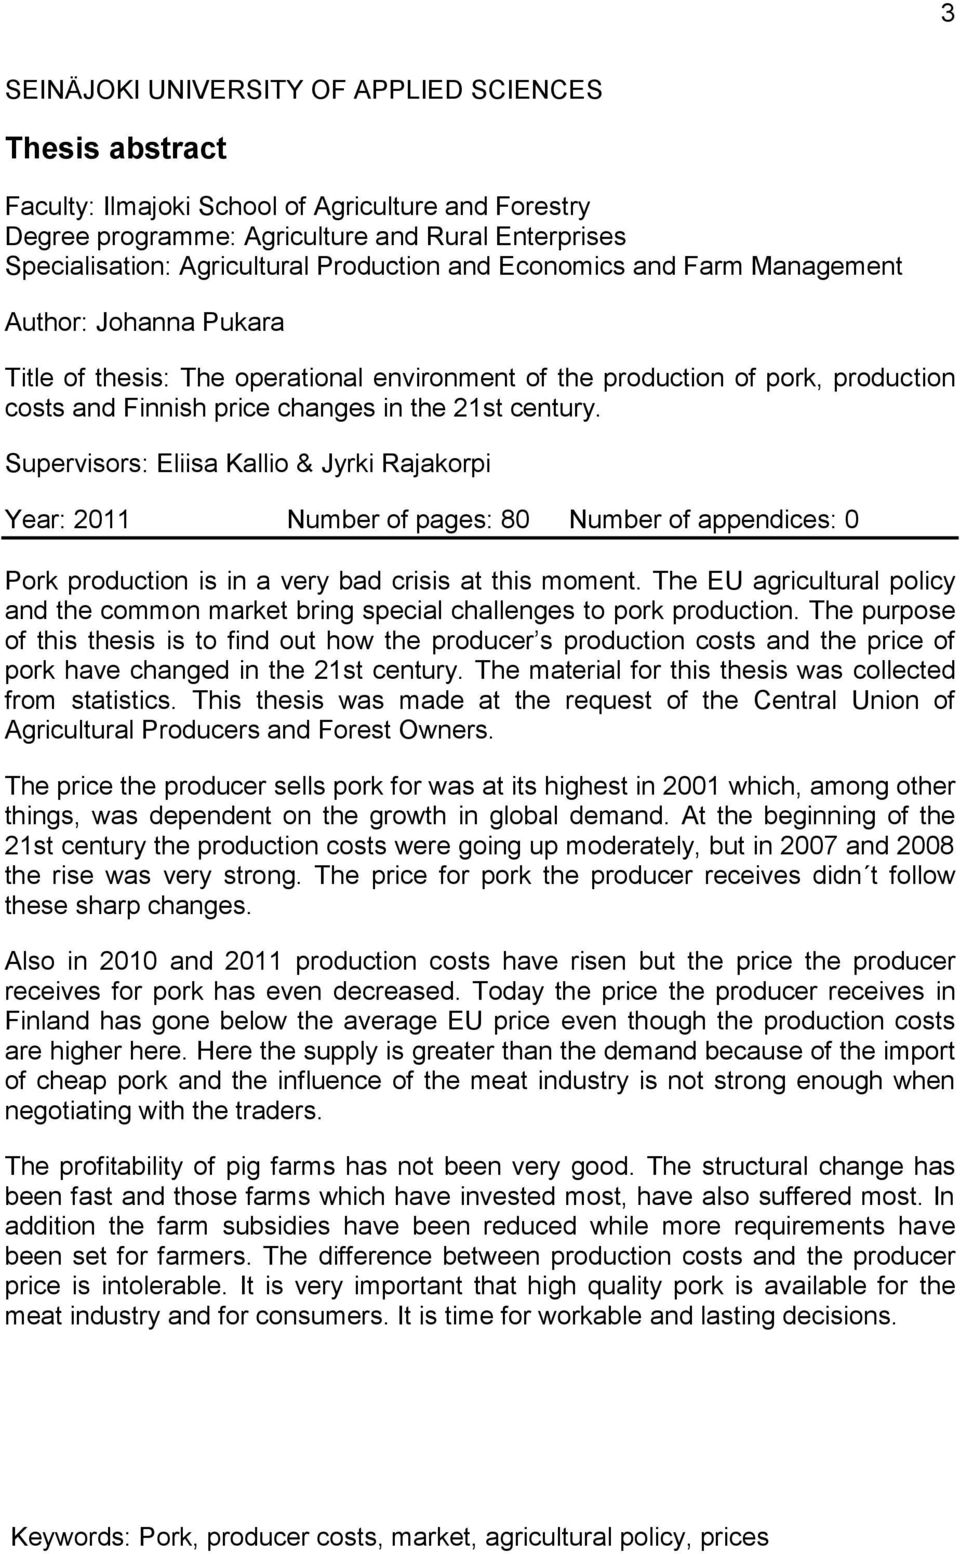 century. Supervisors: Eliisa Kallio & Jyrki Rajakorpi Year: 2011 Number of pages: 80 Number of appendices: 0 Pork production is in a very bad crisis at this moment.